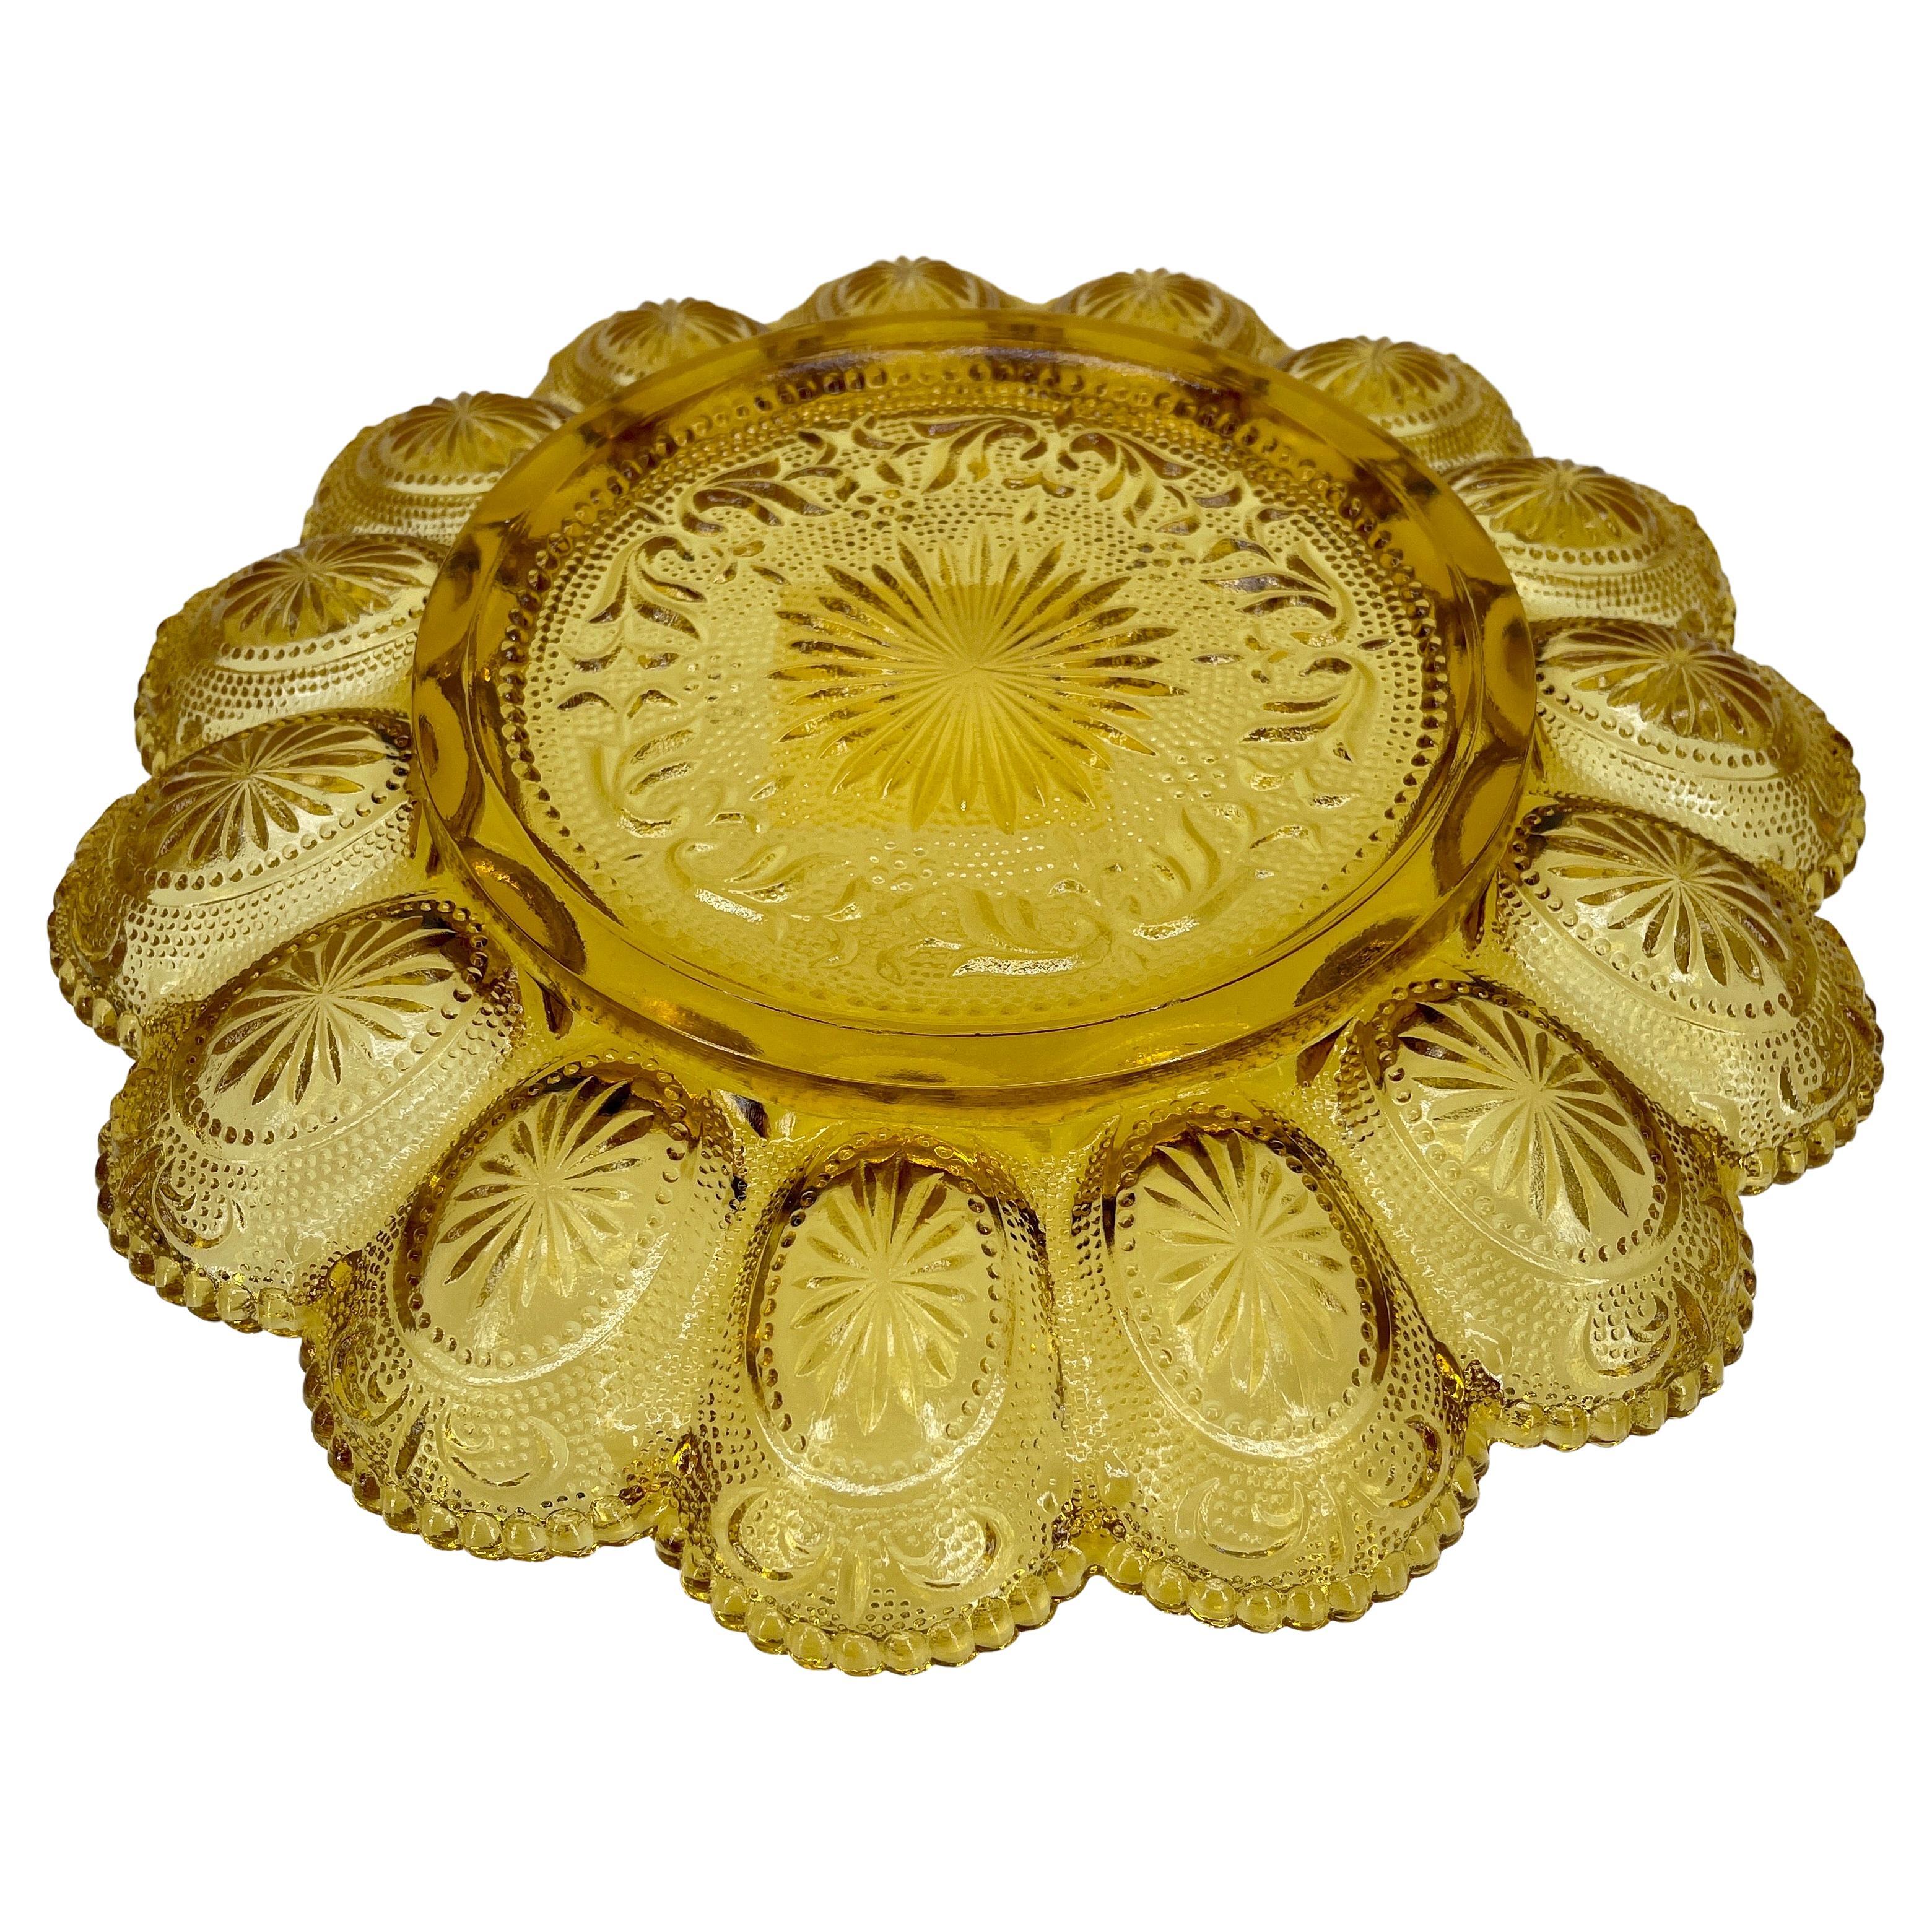 Hobnail amber glass egg or Hors d'oeuvre platter, circa 1960's. Gorgeous golden amber pressed glass plate simply glows as it presents deviled eggs or any appetizer. The scalloped edges and intricate etching make this sweet platter as beautiful as it